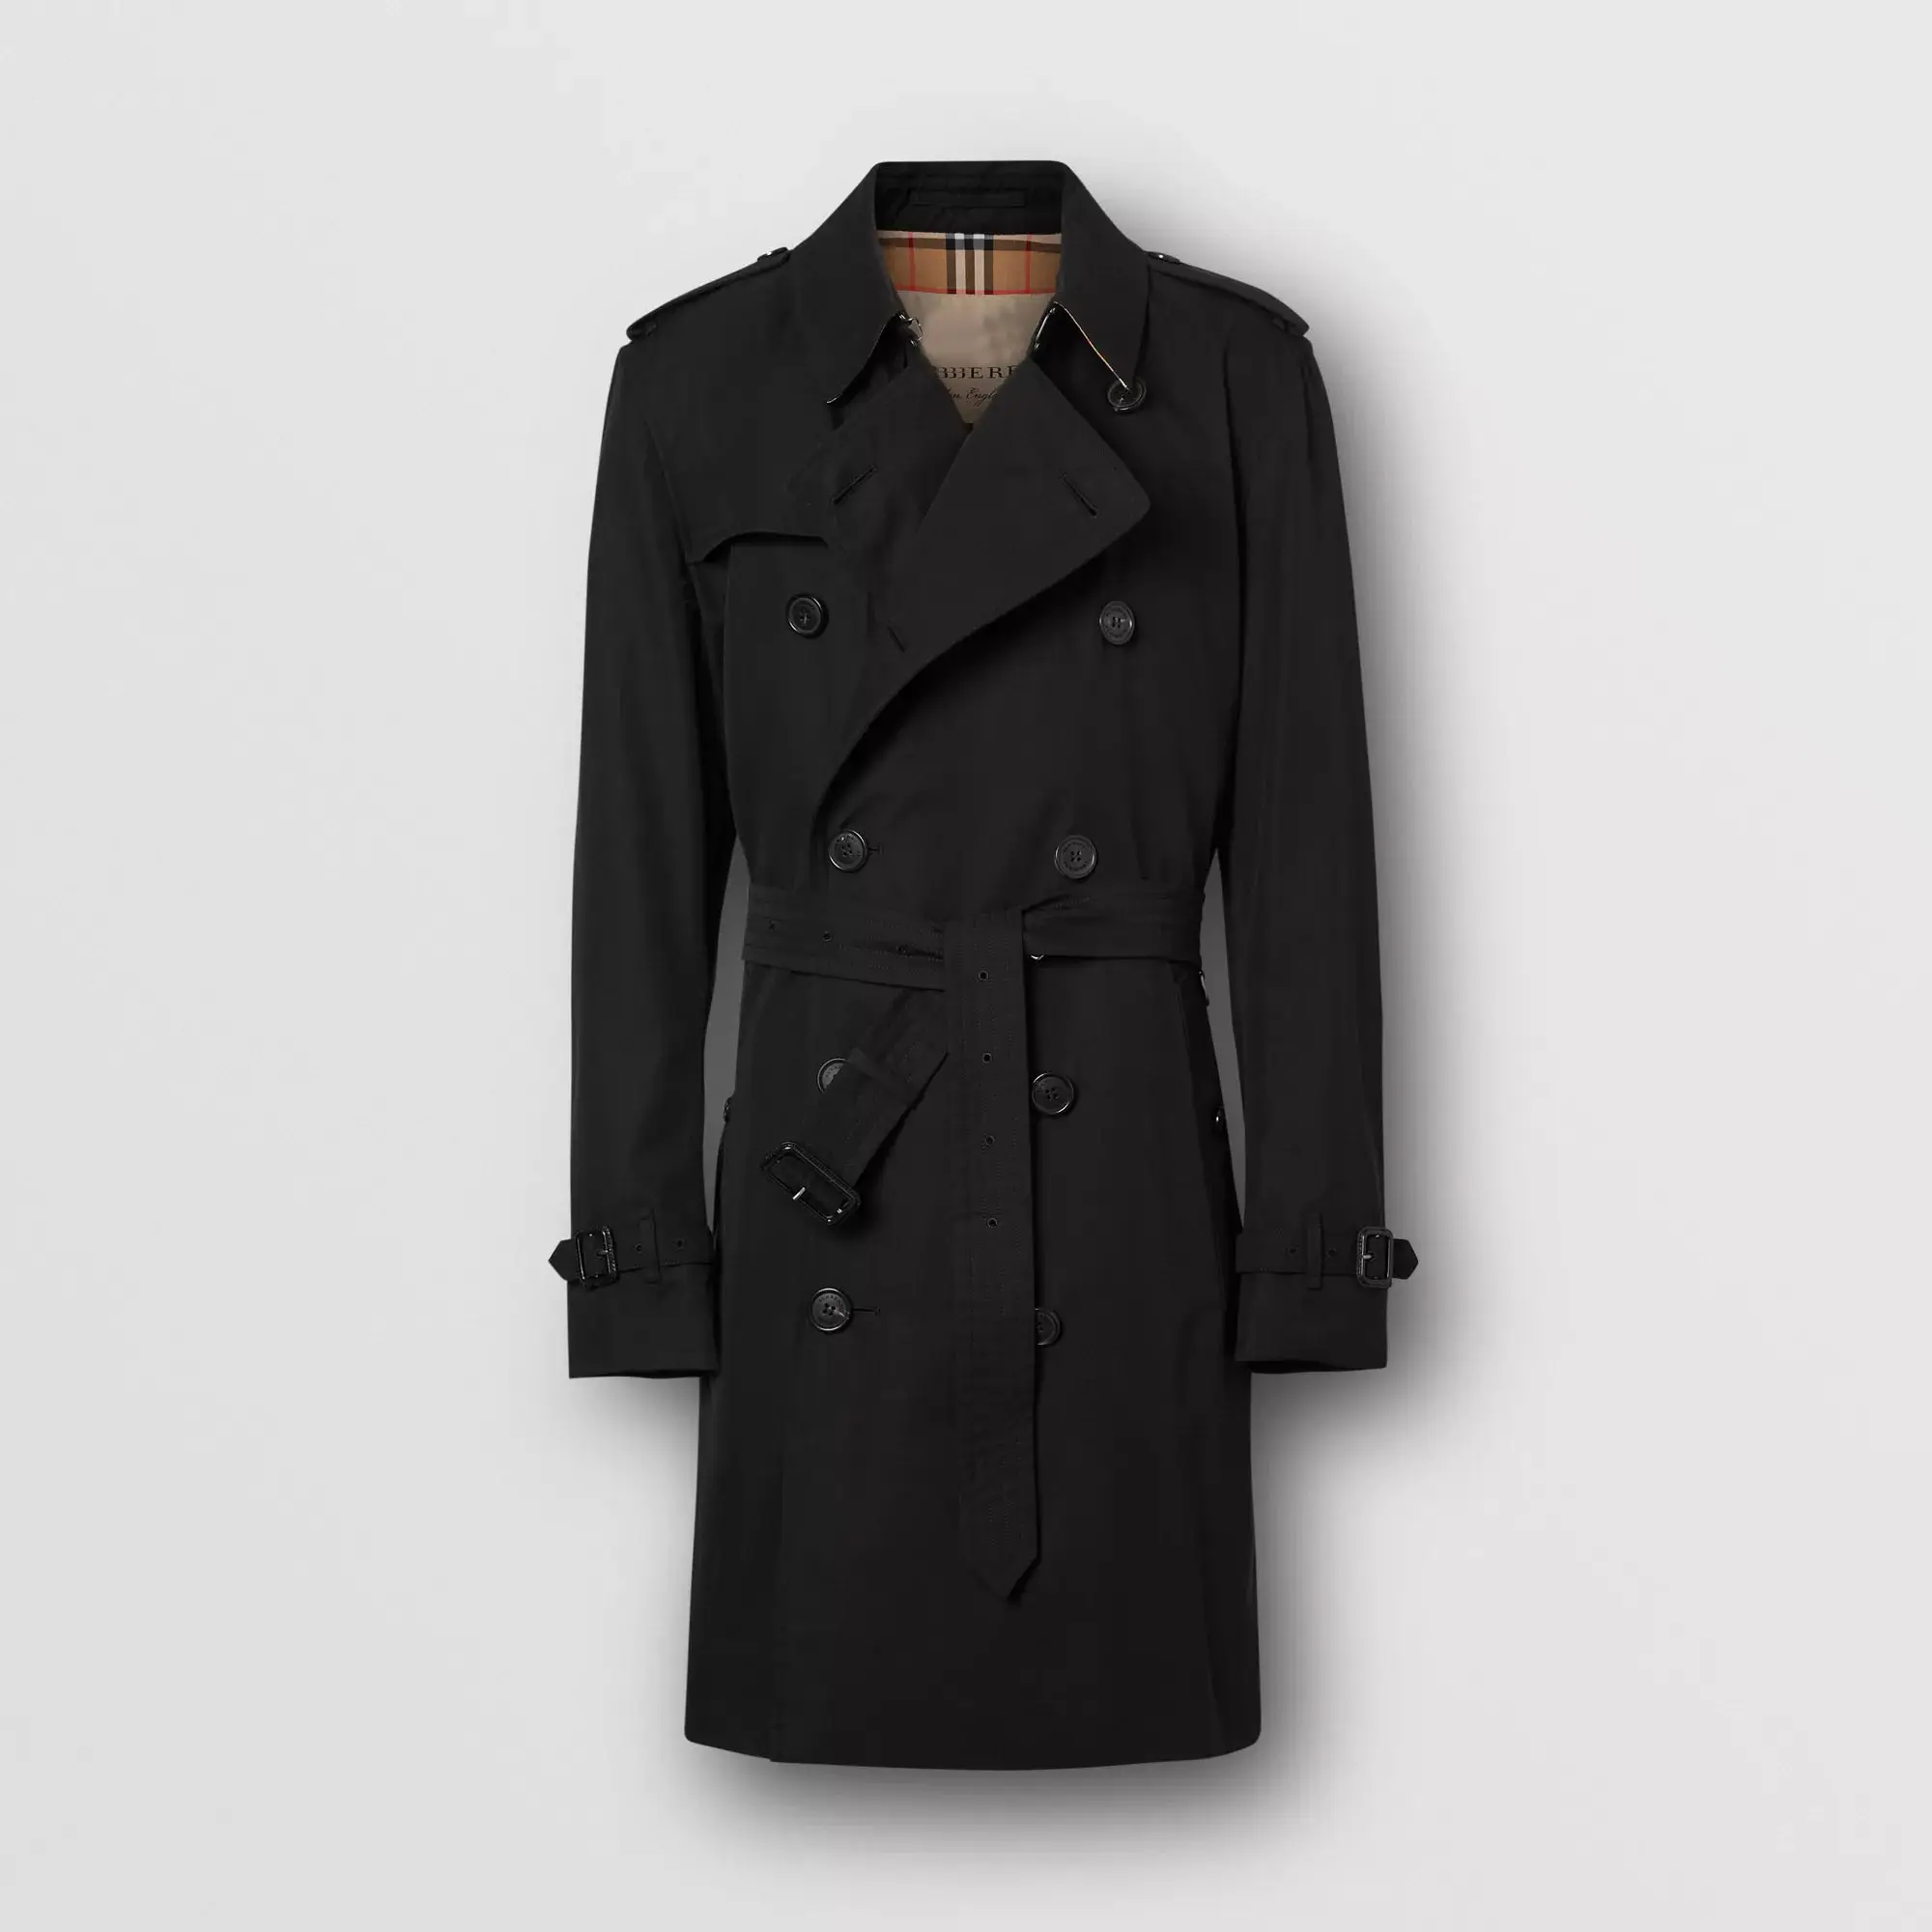 Best High Quality England Solid black Color Woolen Thick Long Trench Coat Men's Coat